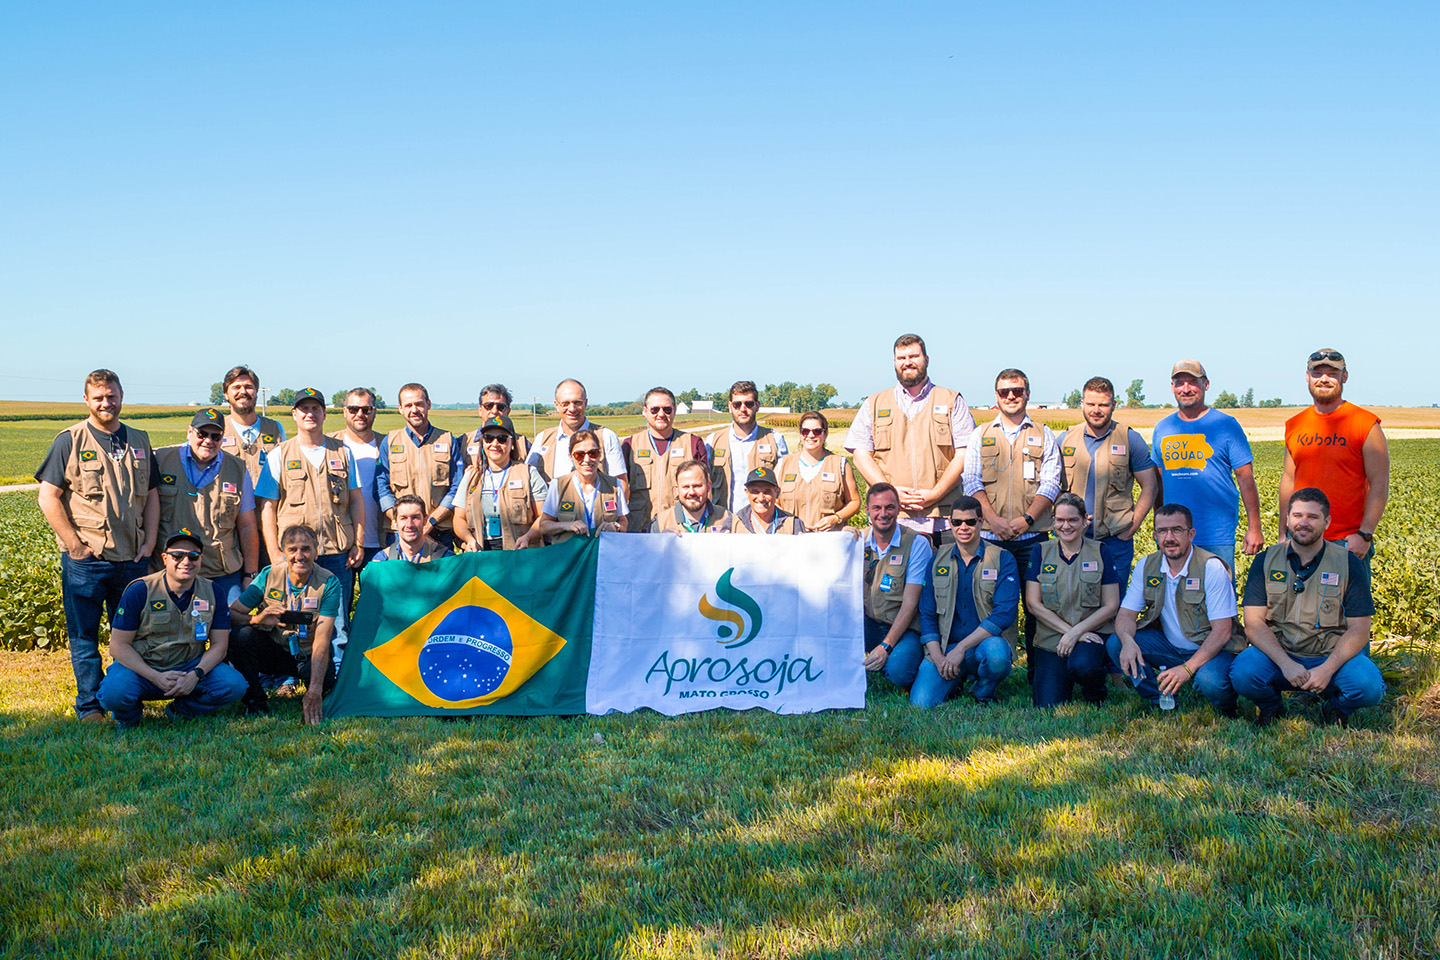 A delegation of farmers from Brazil visited ISA directo